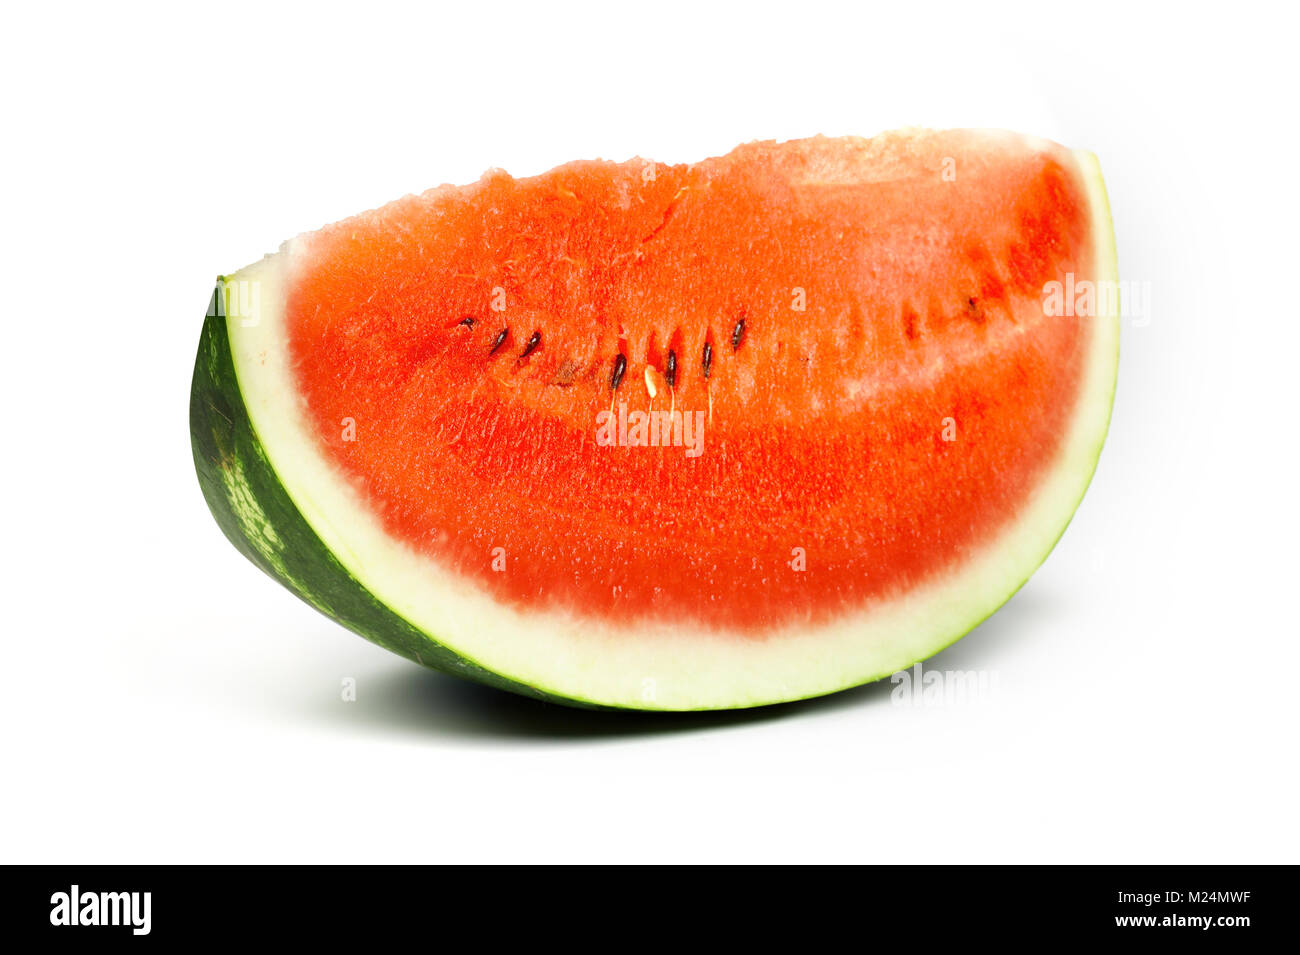 Chopped slice of a watermelon. Healthy food snack. Stock Photo